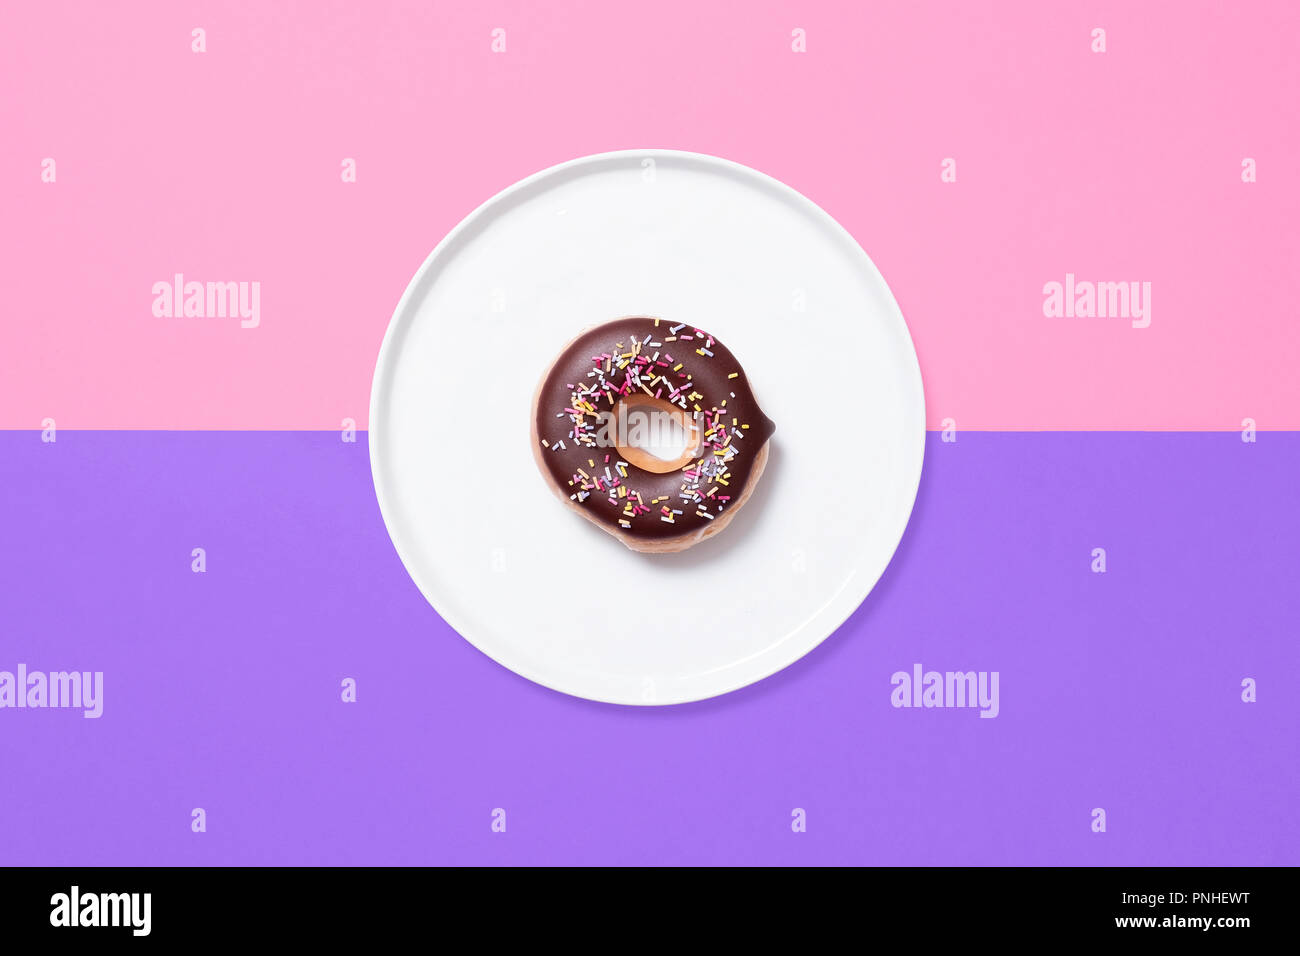 Classic ring donut with chocolate glaze frosting and sprinkles on a white plate on a split coloured pastel background of pink and purple. Stock Photo